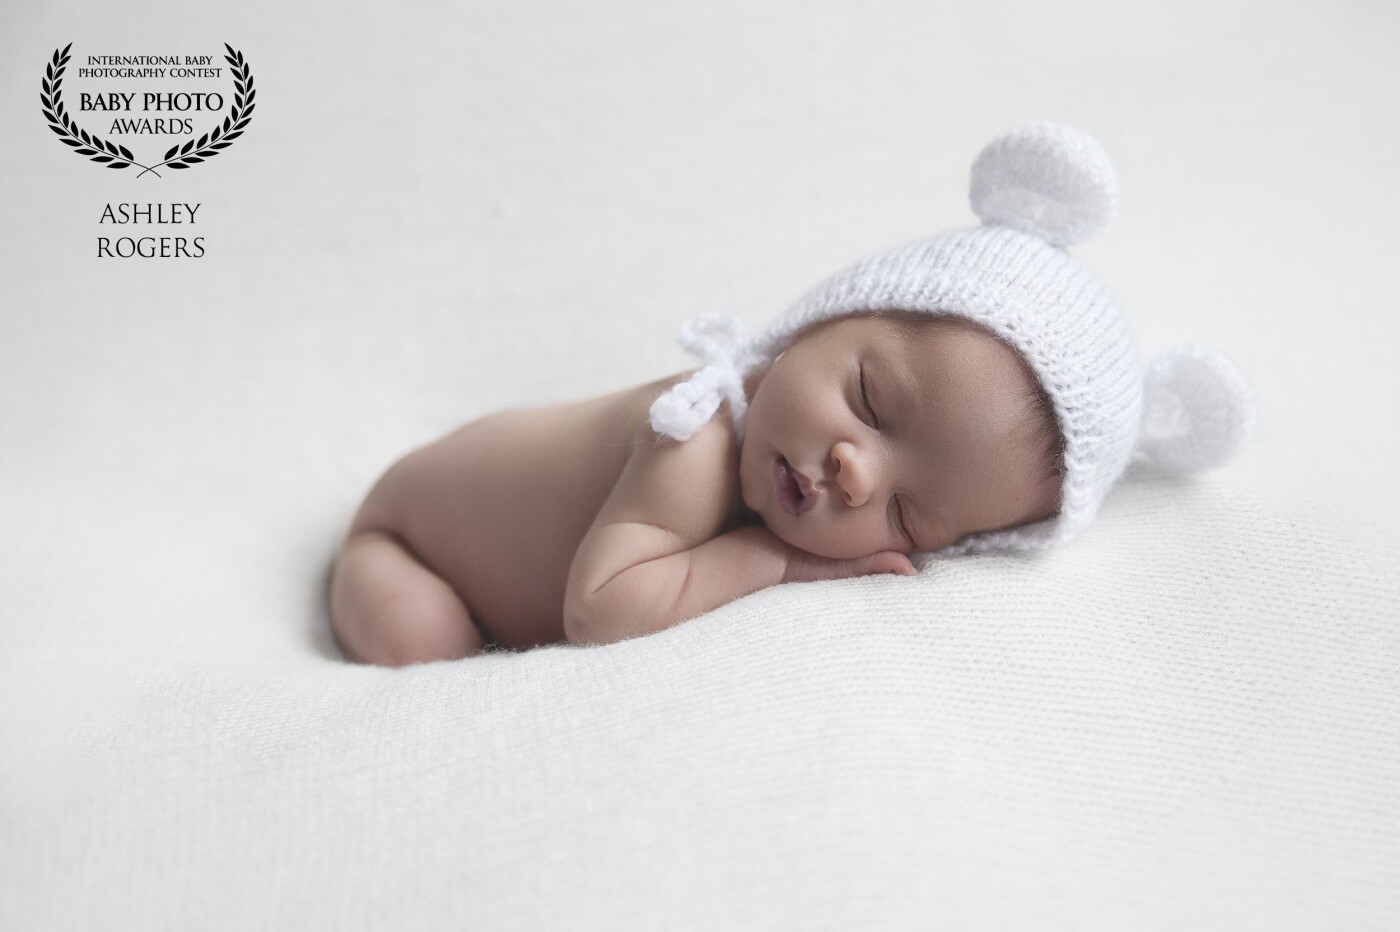 This beautiful little girl was less than 6lbs at birth. She was 10 days new when she came into my studio, and she was absolutely perfect. I am blessed to have the opportunity to photograph precious little ones and their families!